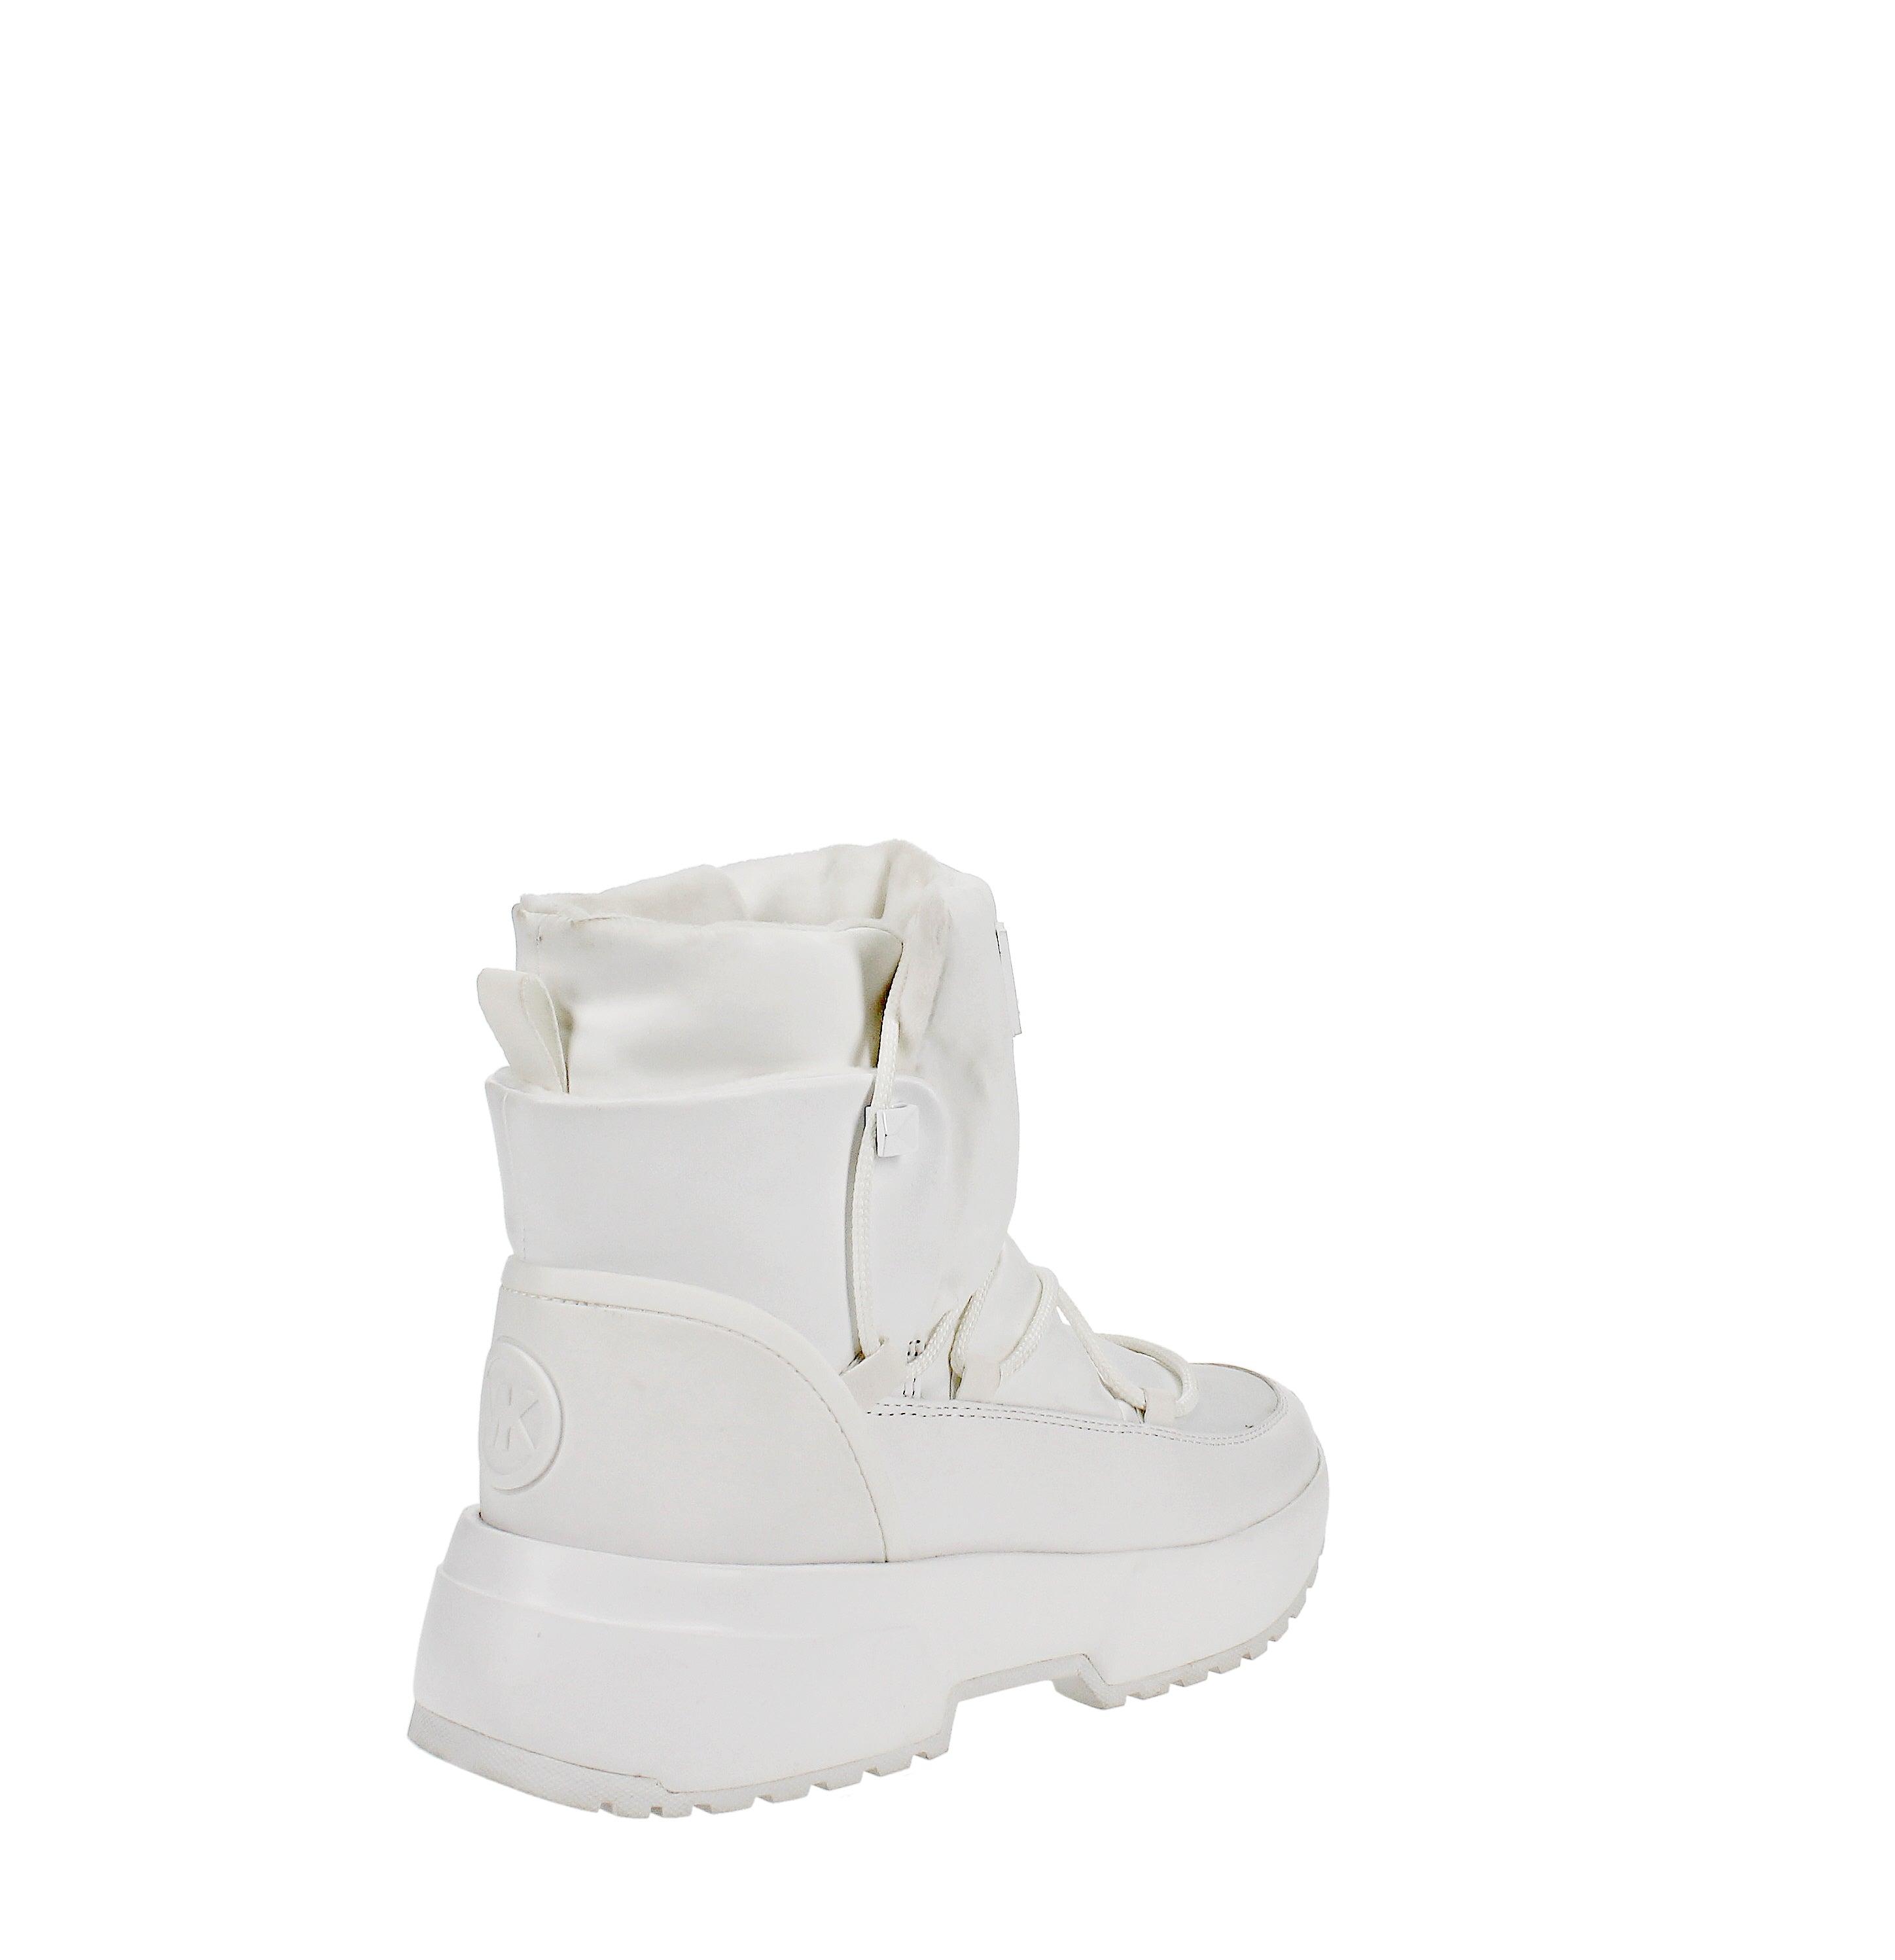 MICHAEL Michael Kors Leather Cassia Platform Sneaker Booties in White - Lyst